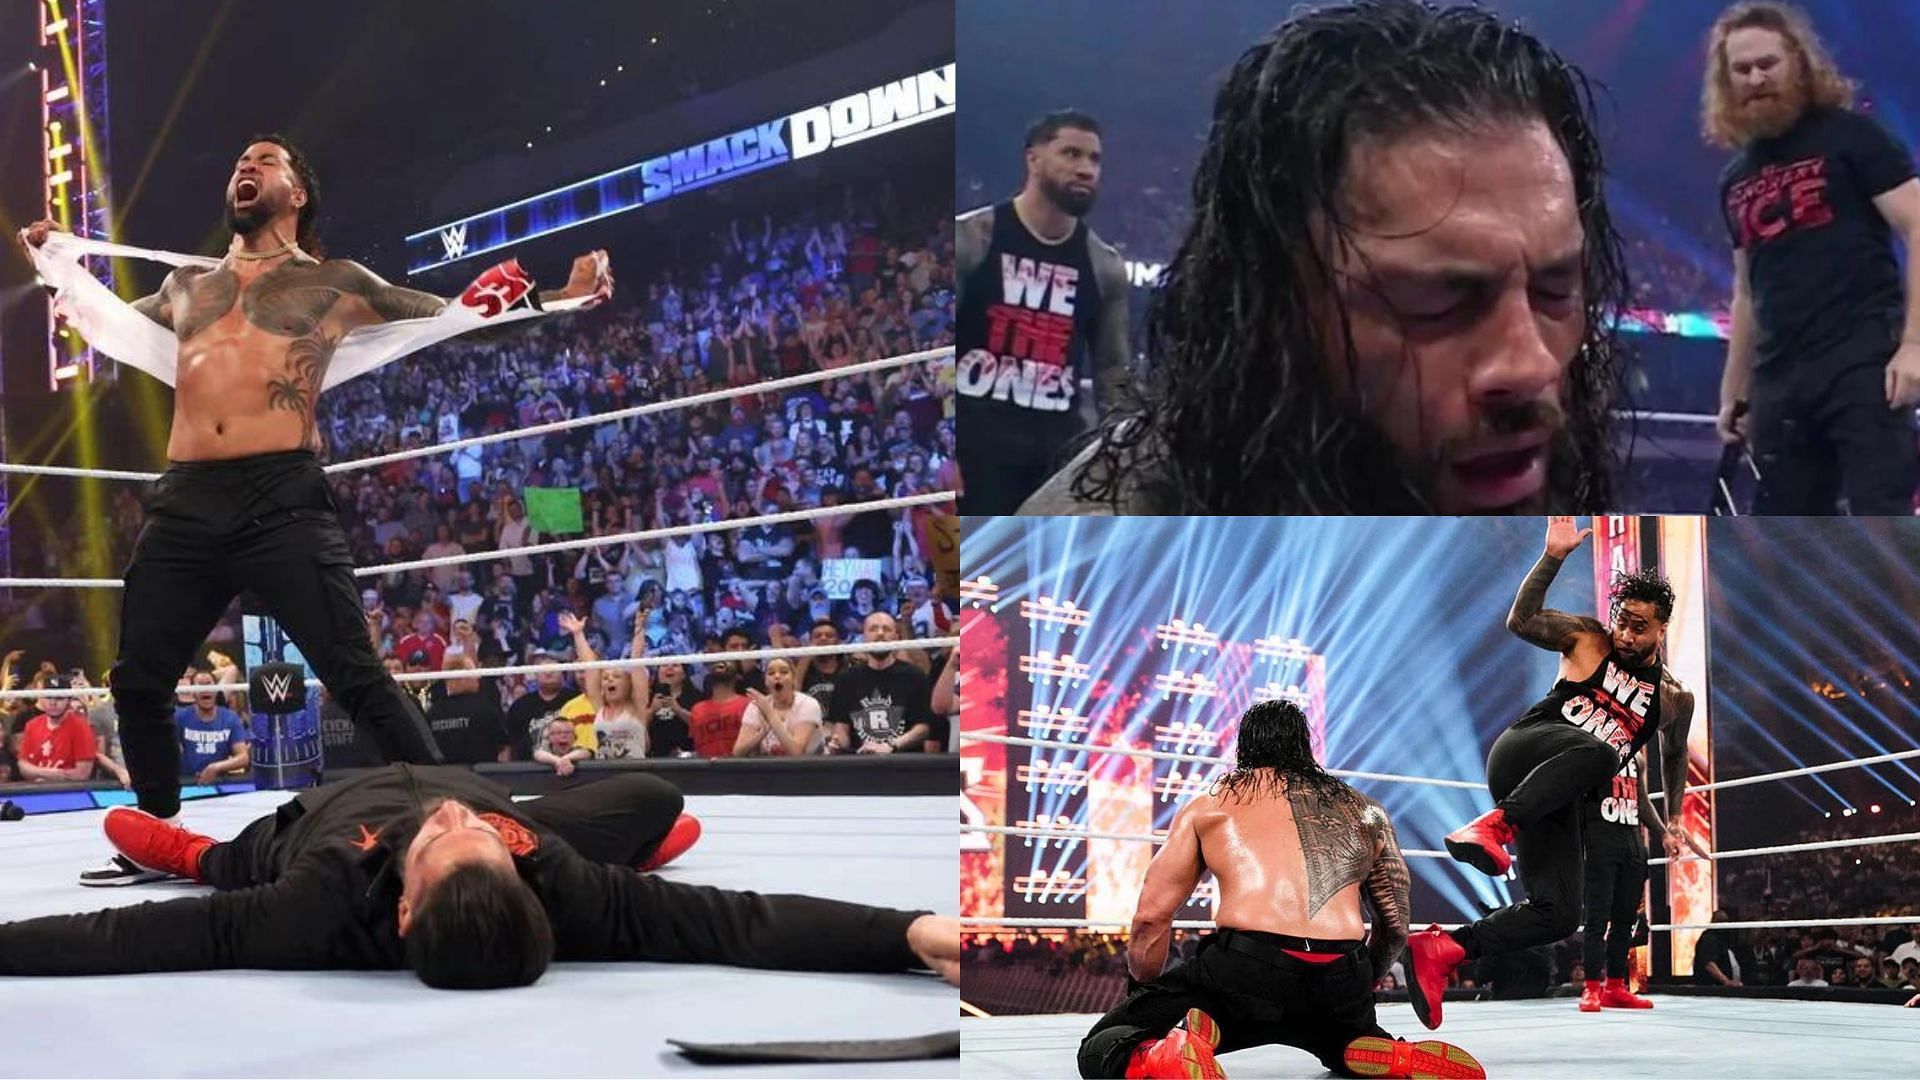 Roman Reigns was betrayed multiple times throughout the year